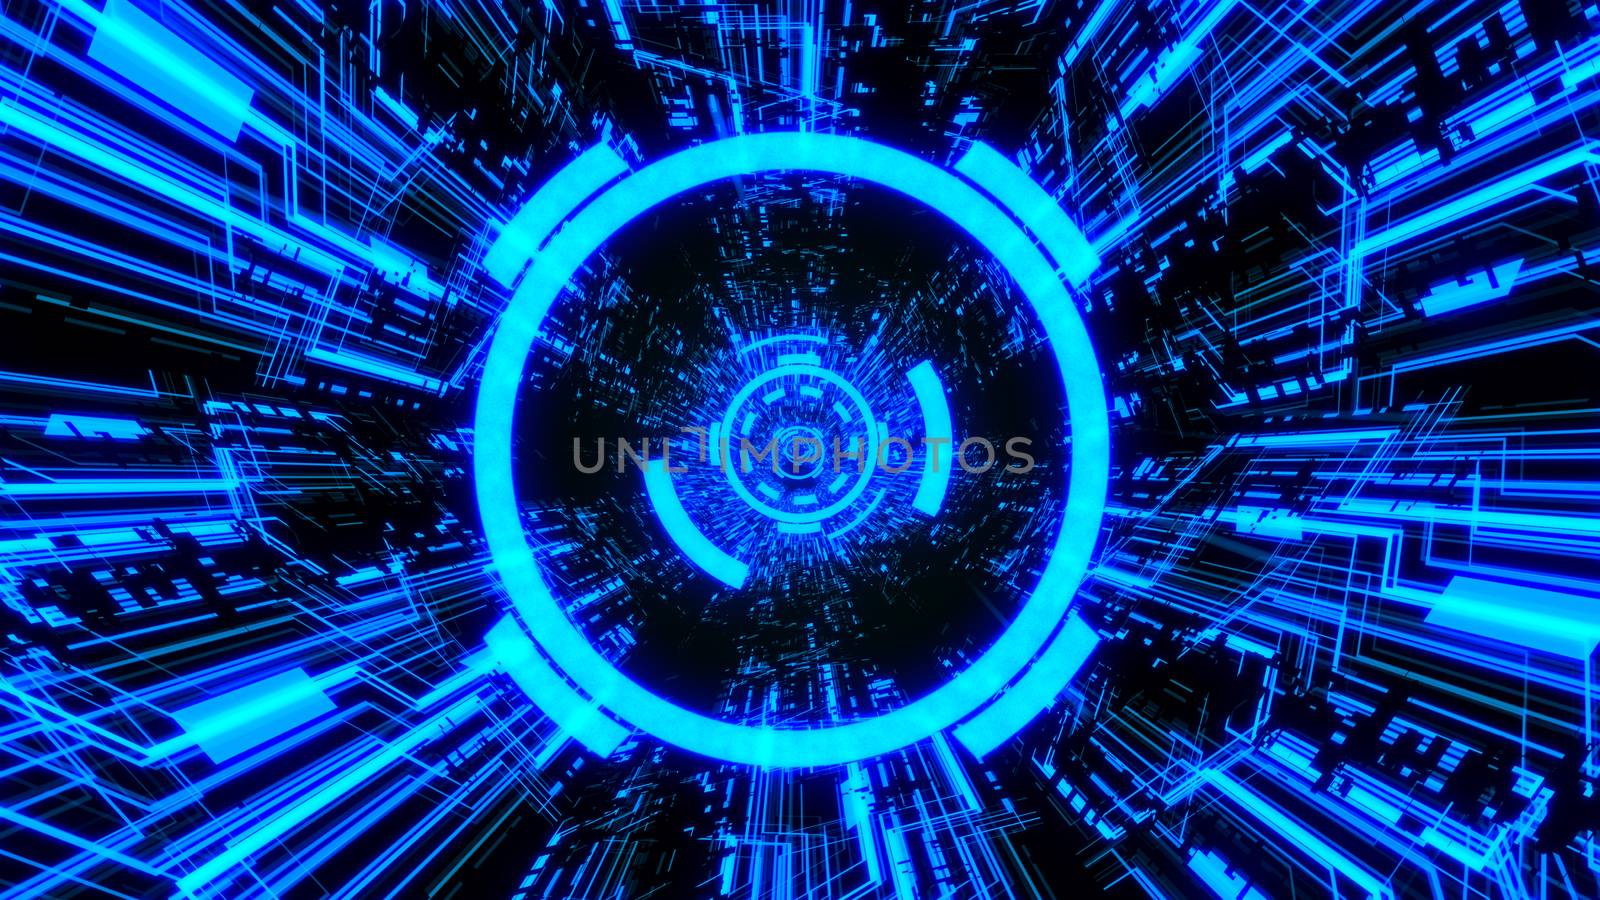 3D Digital Circuit System Tunnels and Waves with Digital Circles in the middle in Blue color theme Background Ver.3